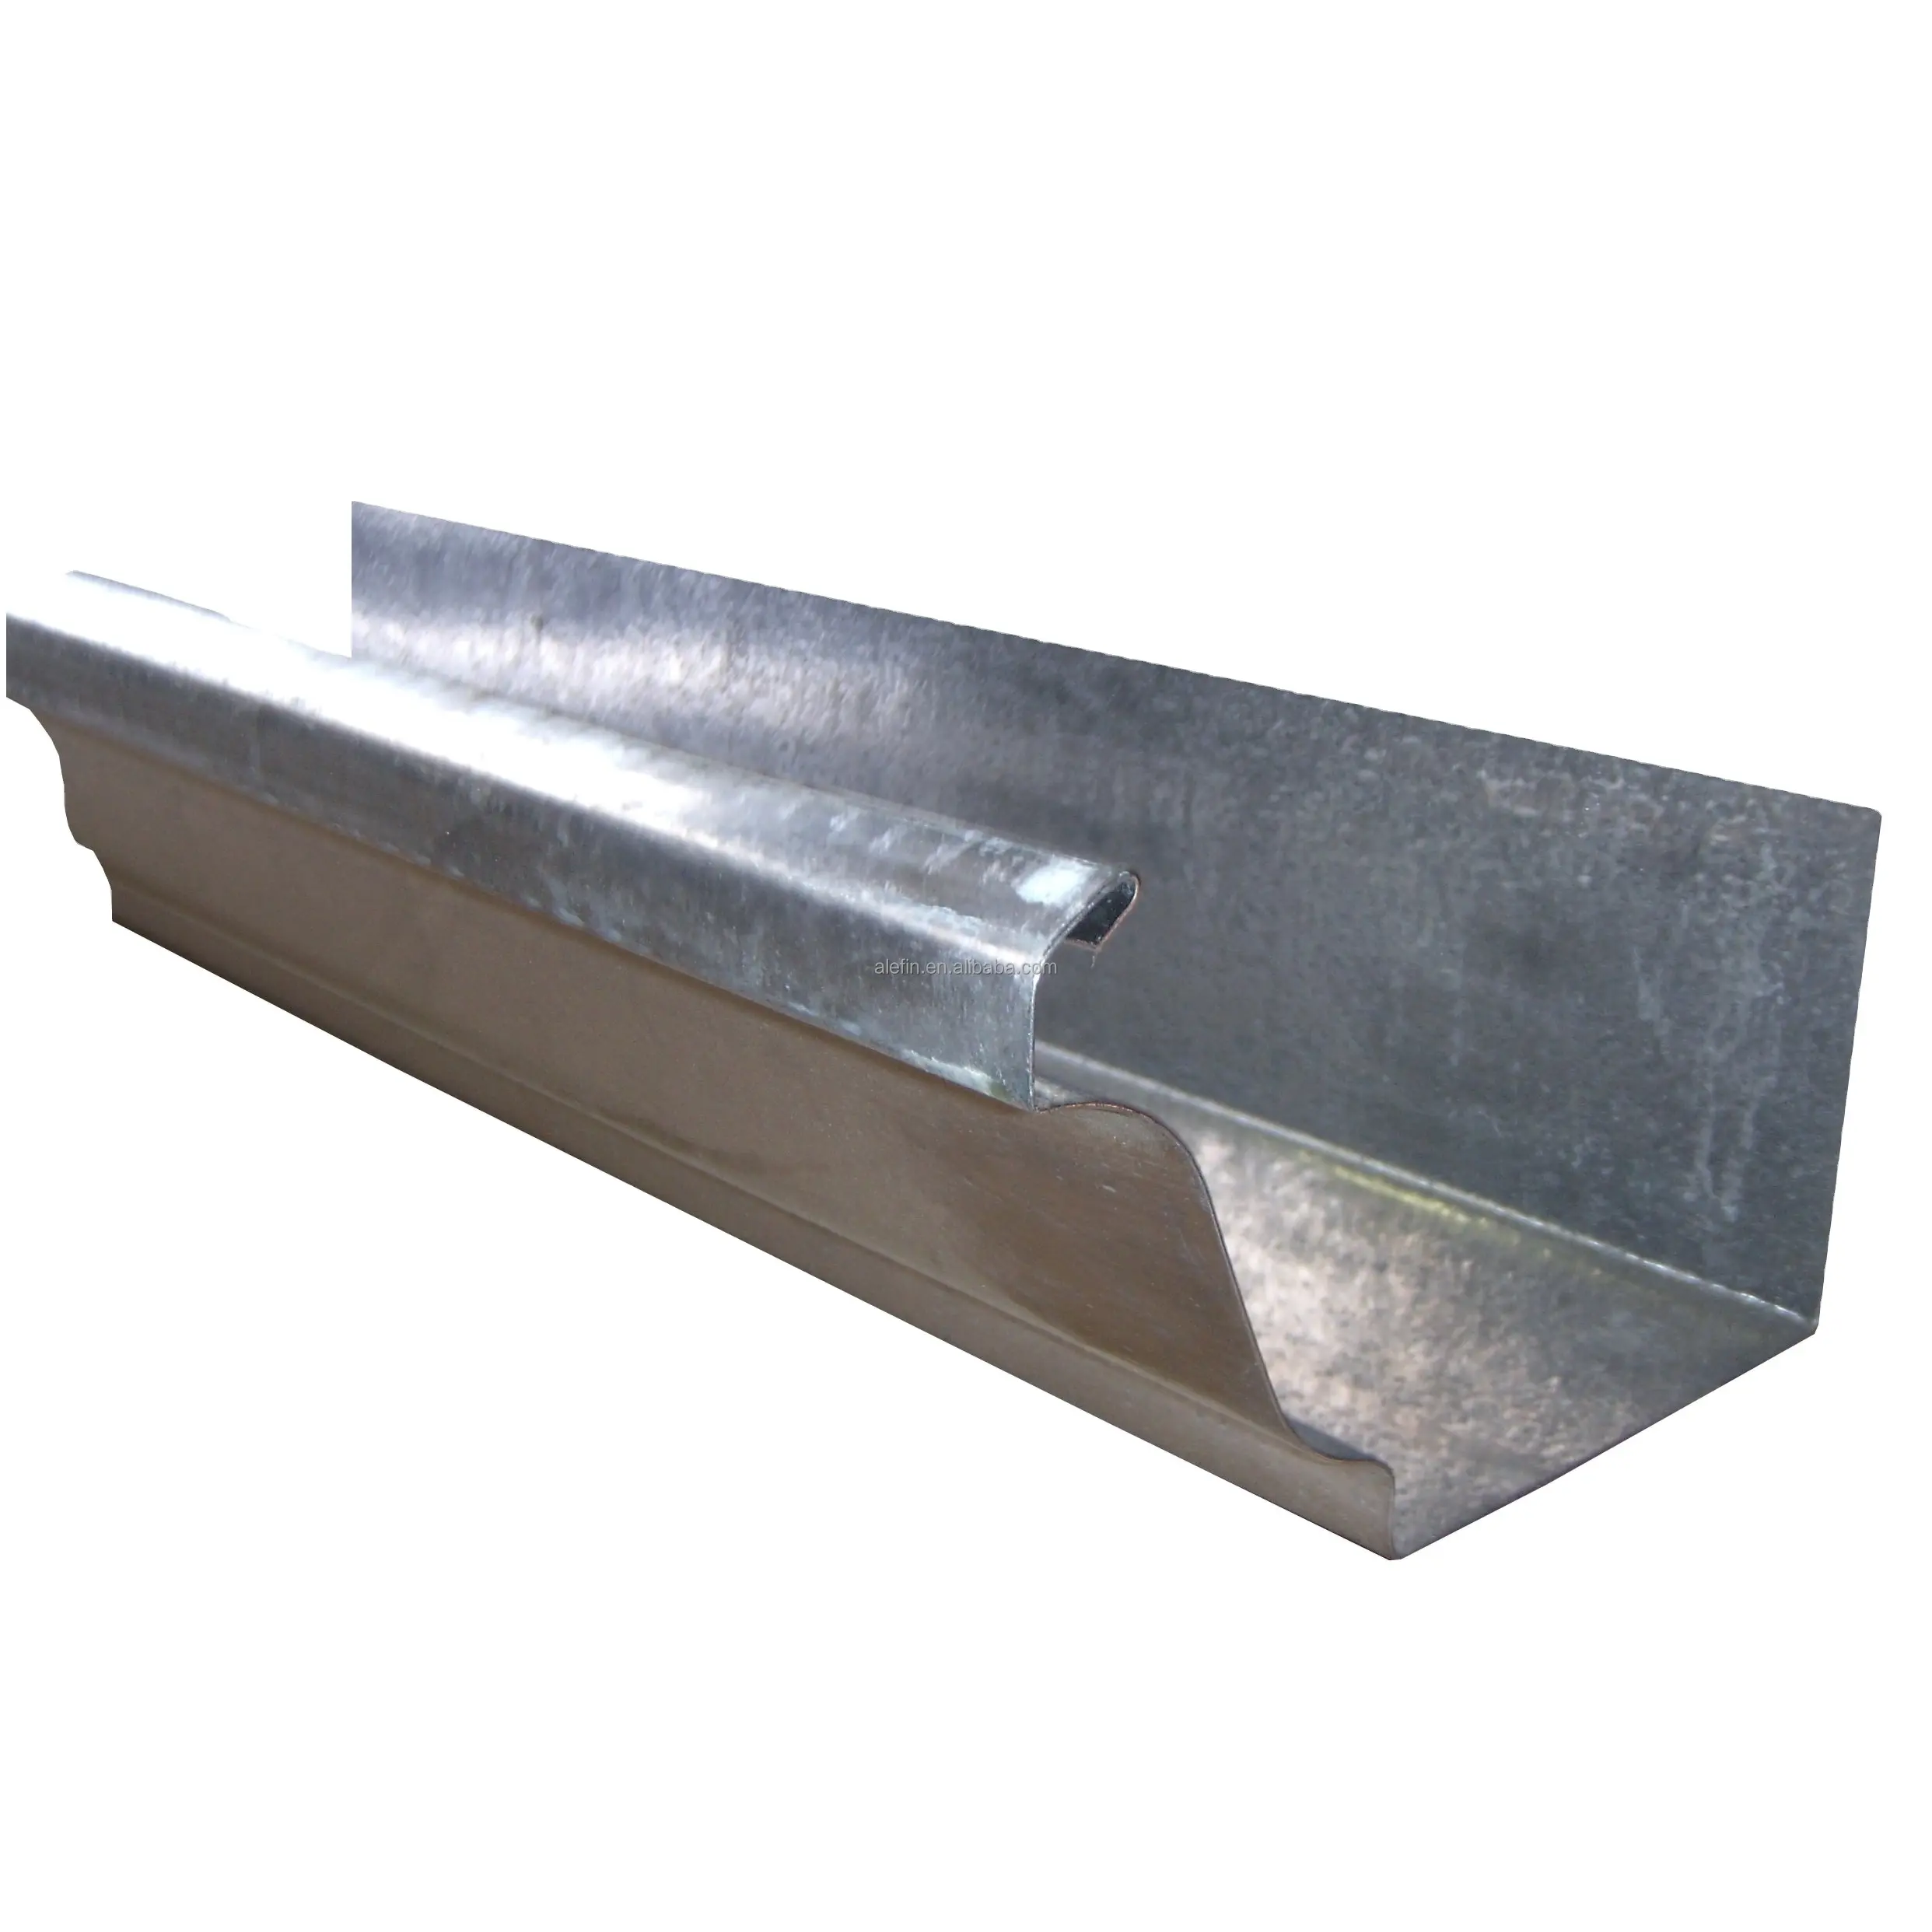 Stainless steel rain drain gutter with customized shape and size provide by Elephant roll forming technology